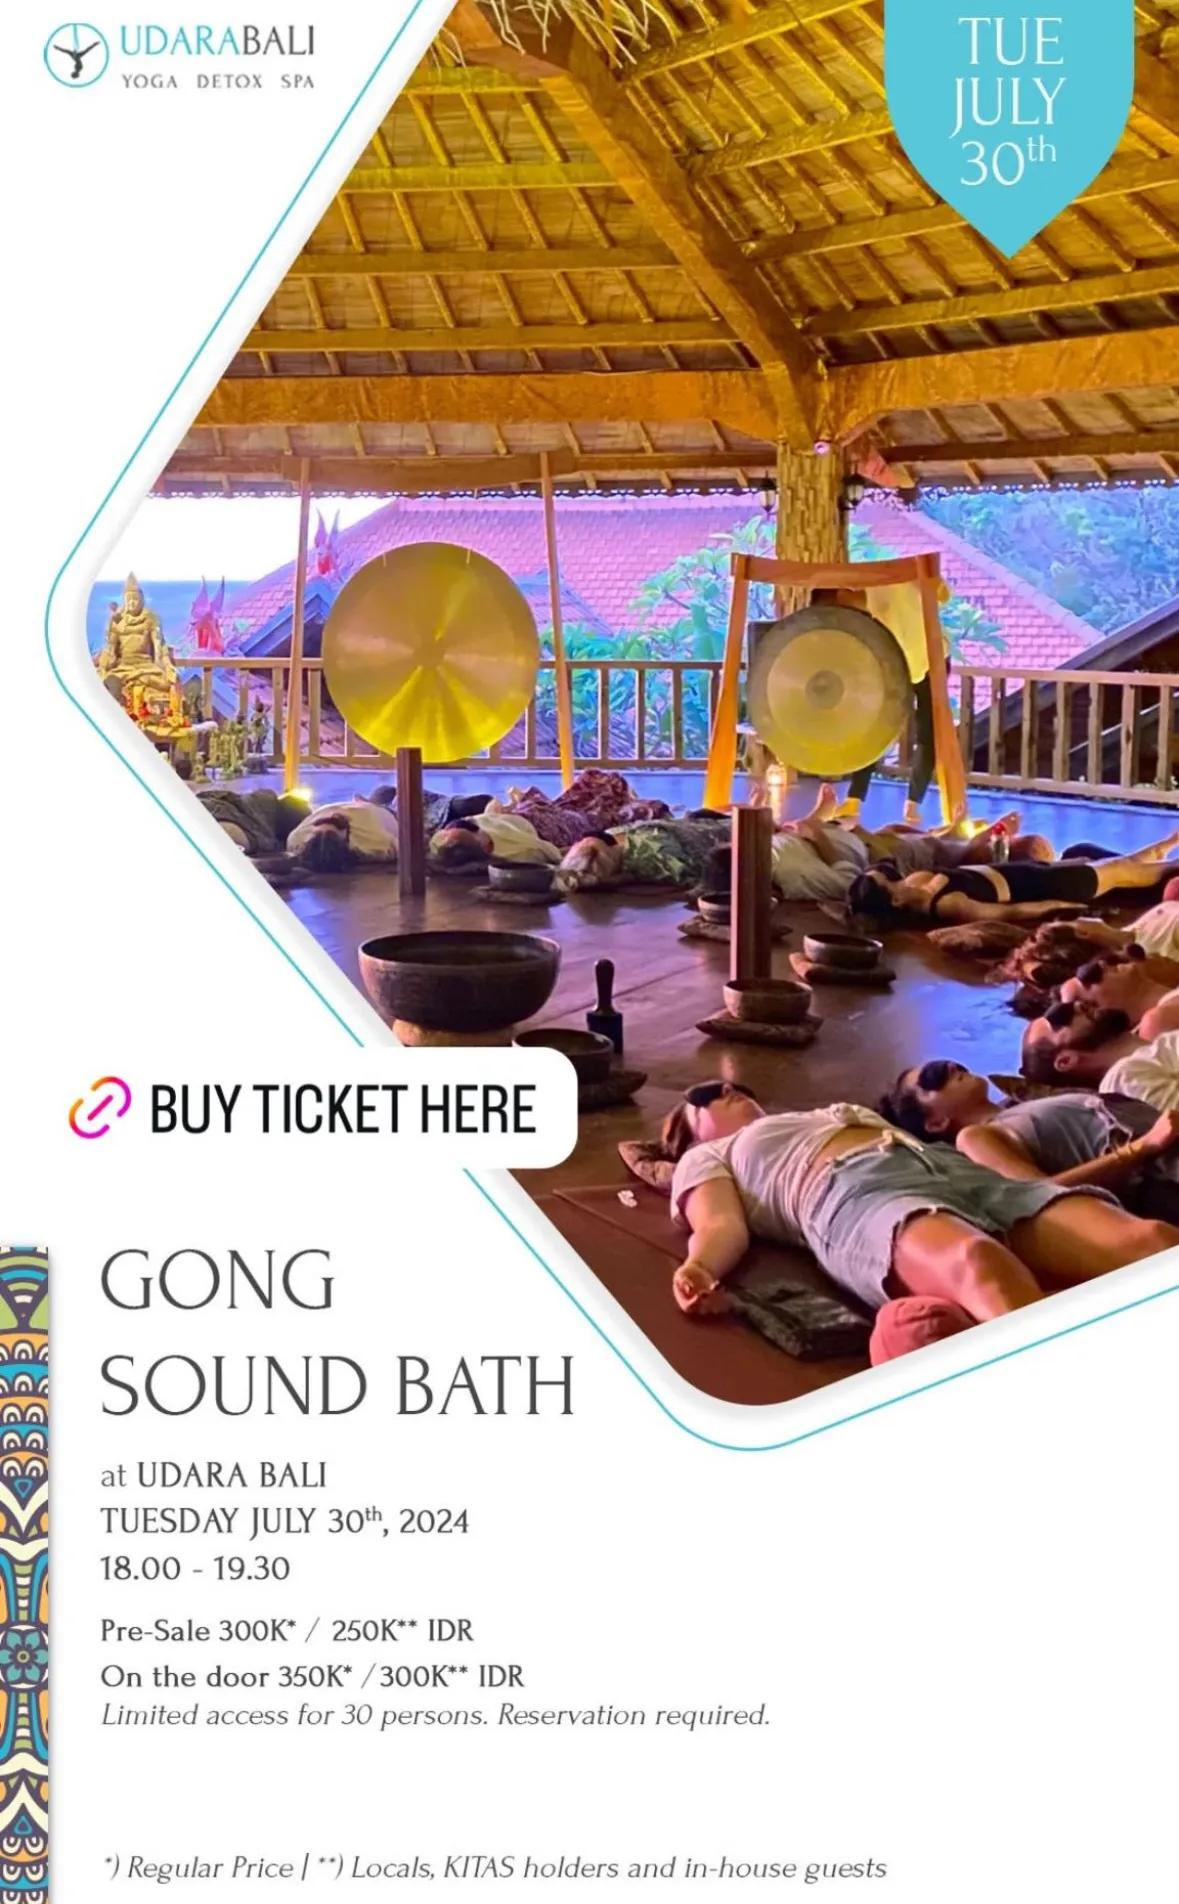 Event at Udara on July 30 2024: Gong Sound Bath